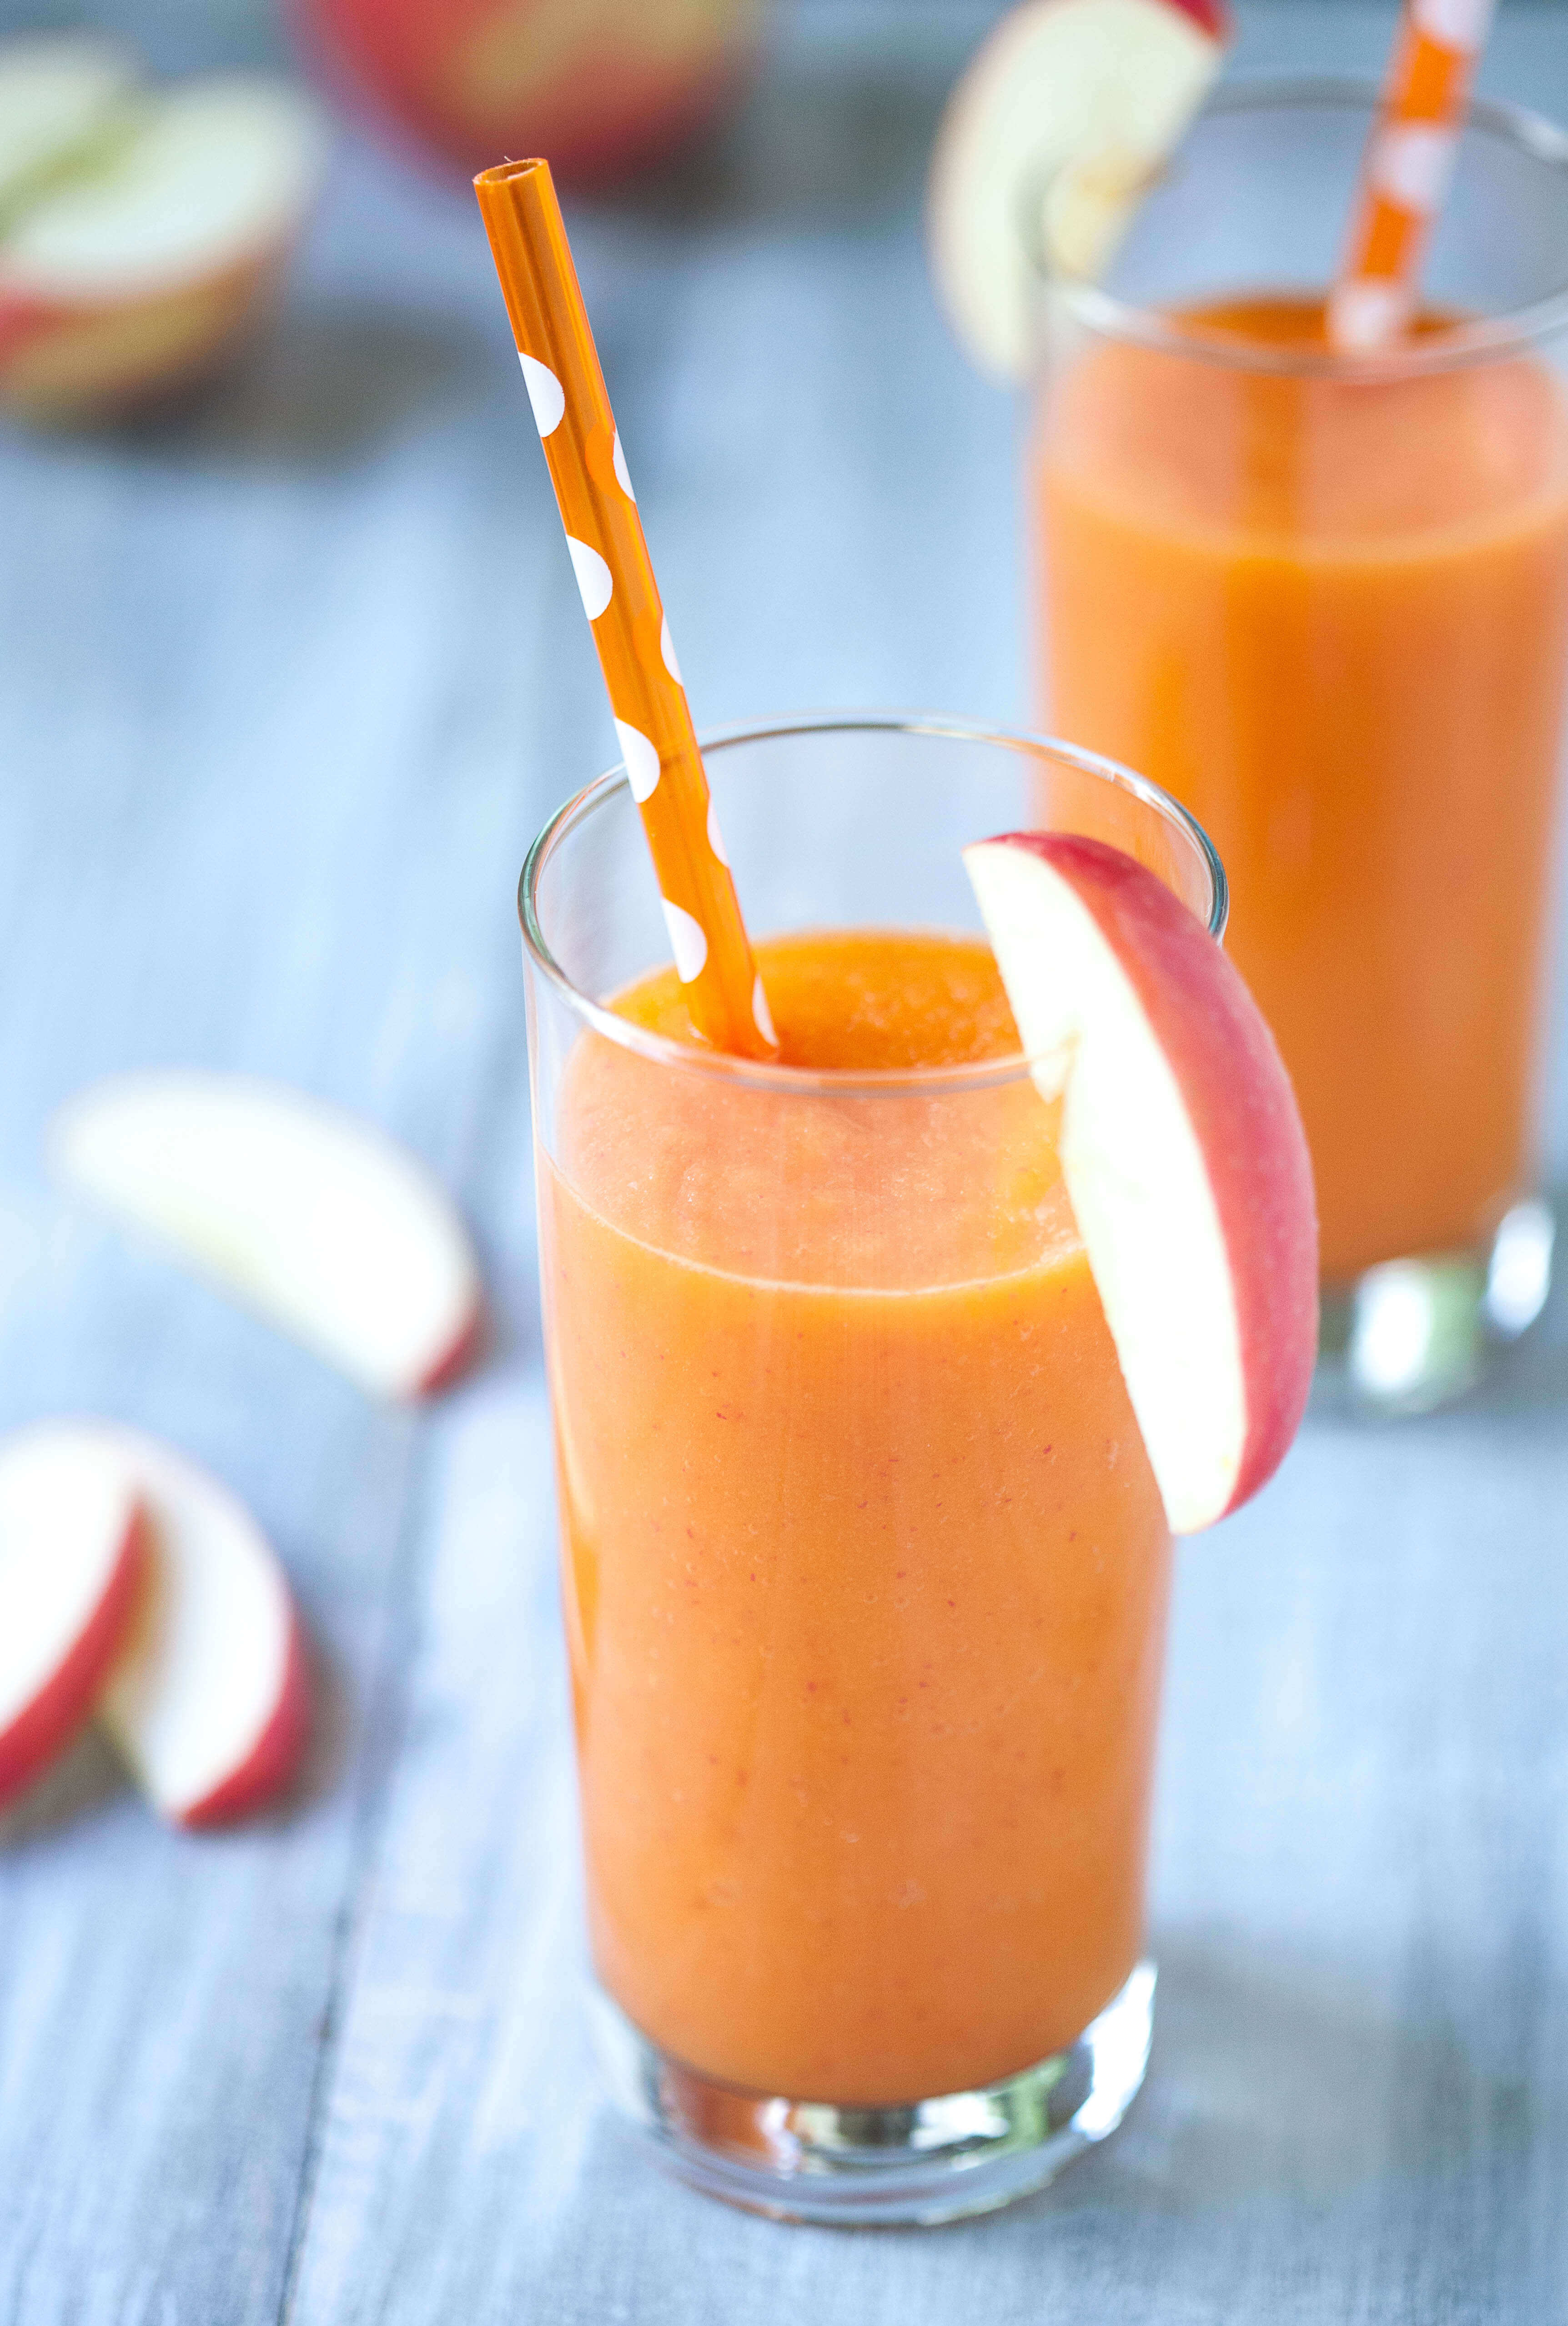 Apple Carrot Ginger Smoothie